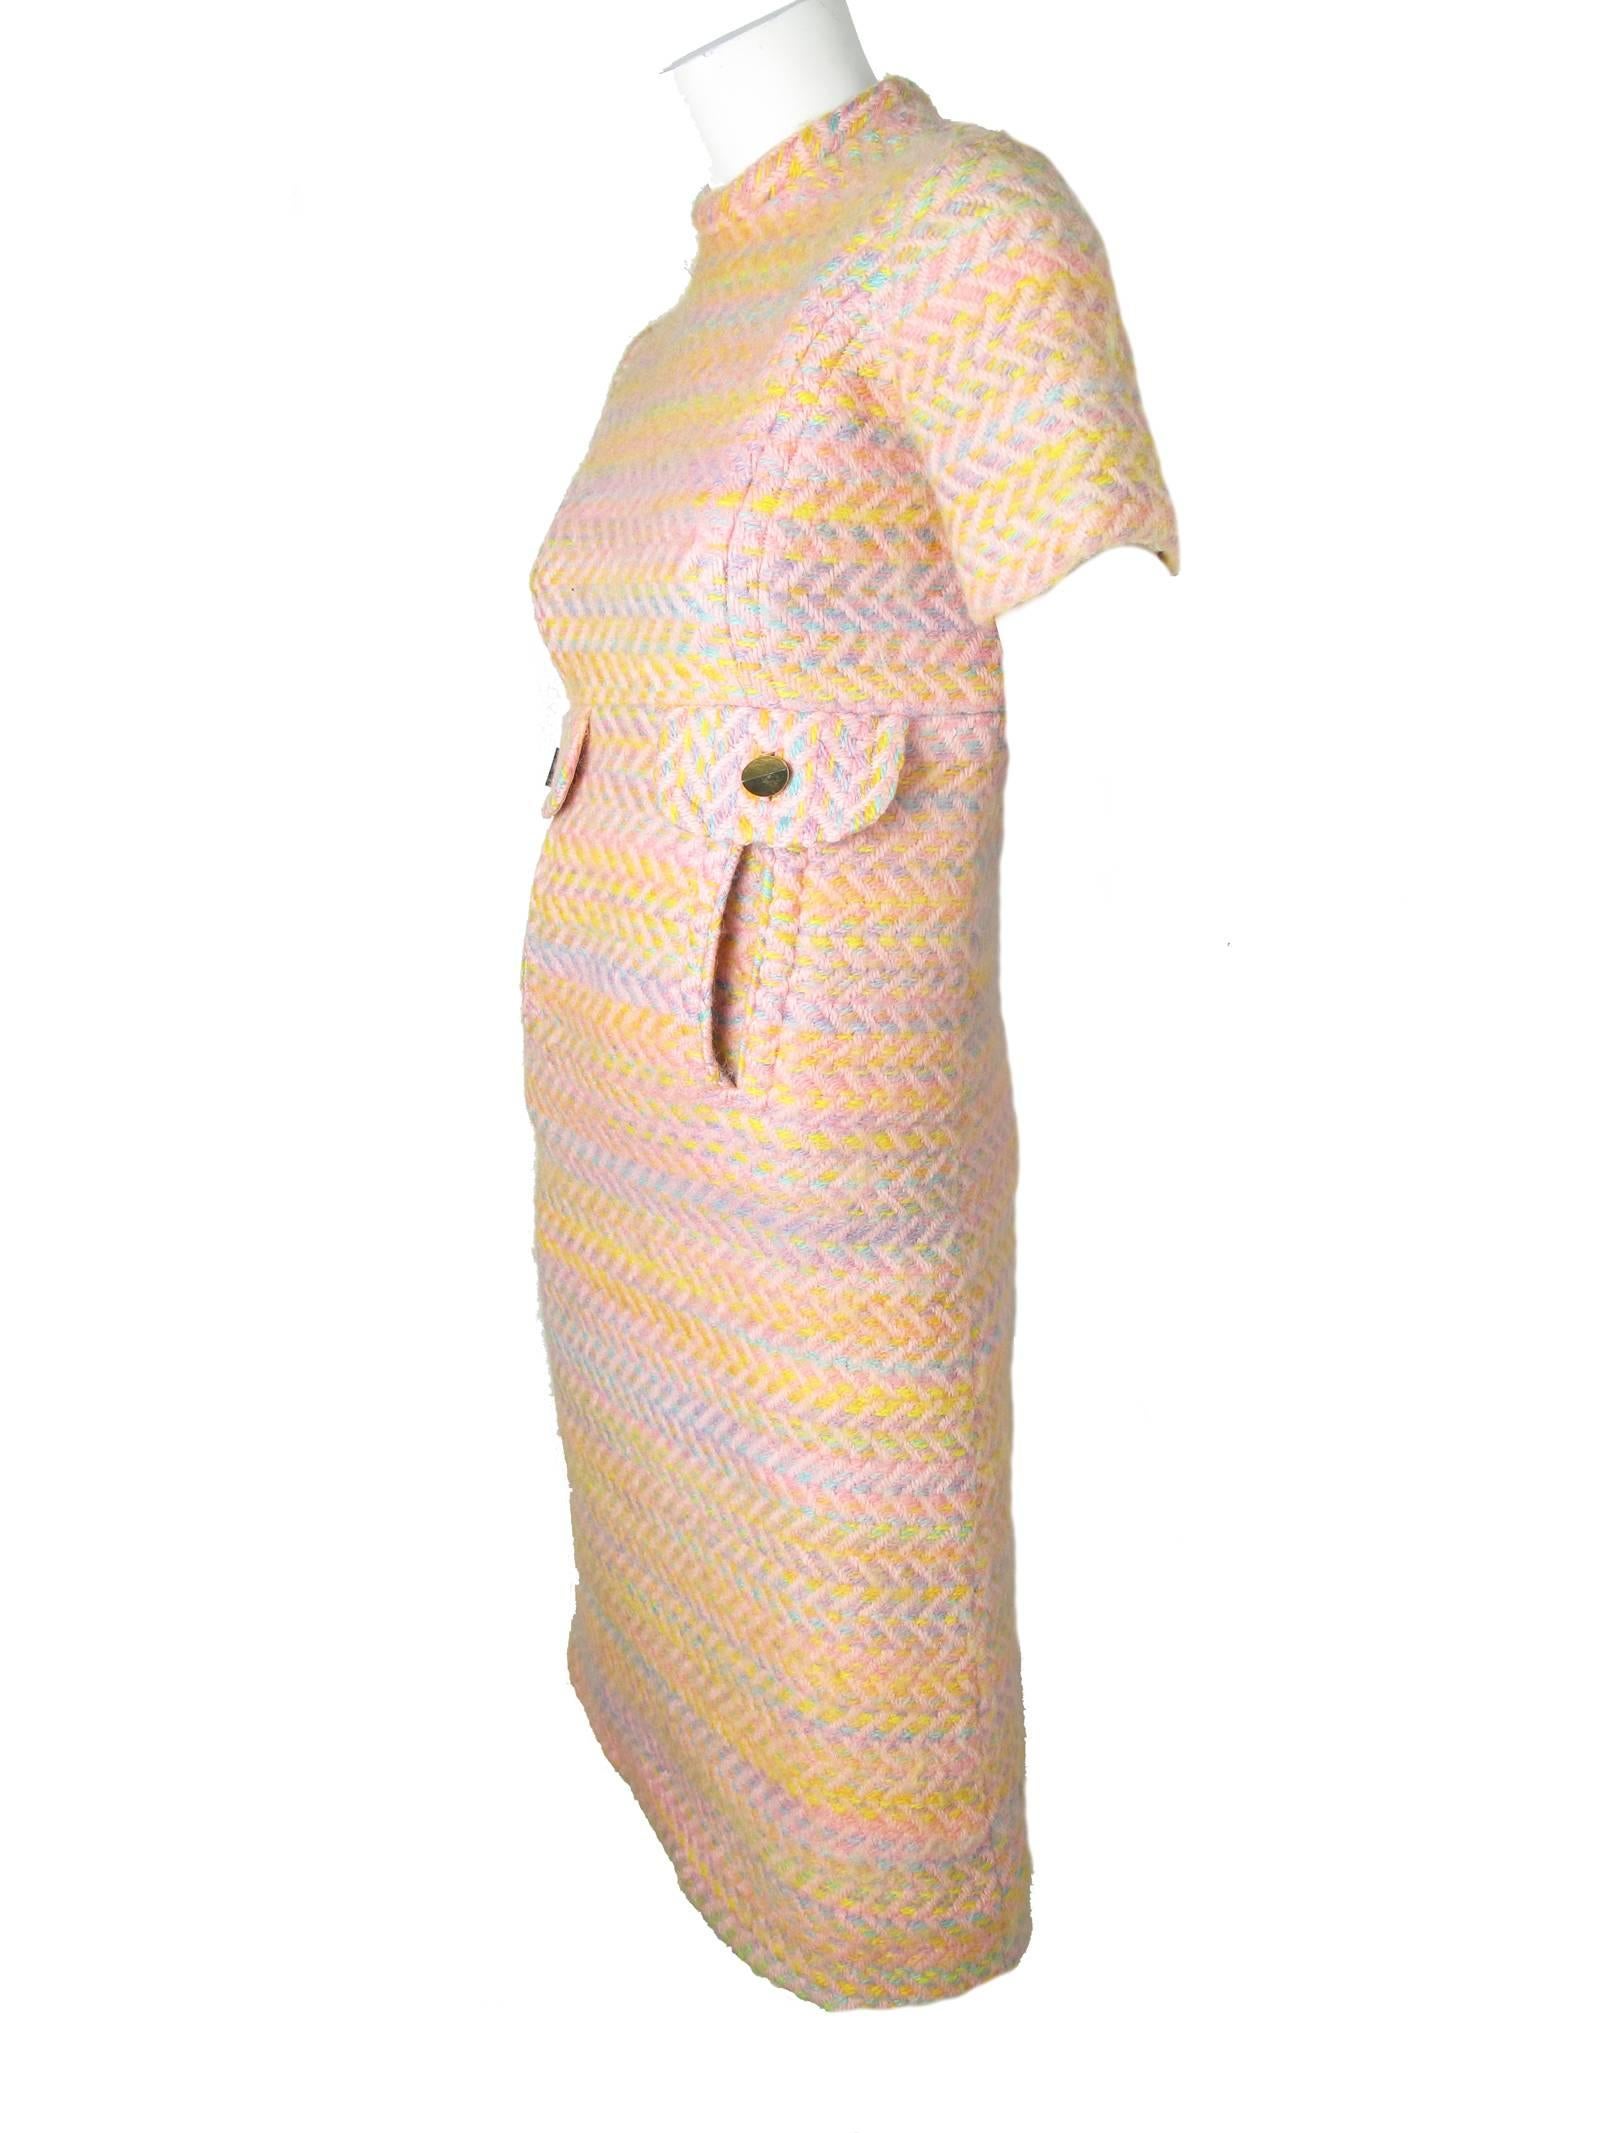 1960s Bill Blass pastel wool dress with interesting front slashed pockets.  Condition: Good, a little fuzzy all over.  
Size 2 - 4
33" bust, 28" waist, 36" hips, 8" sleeve, 14" shoulder, 40" length.